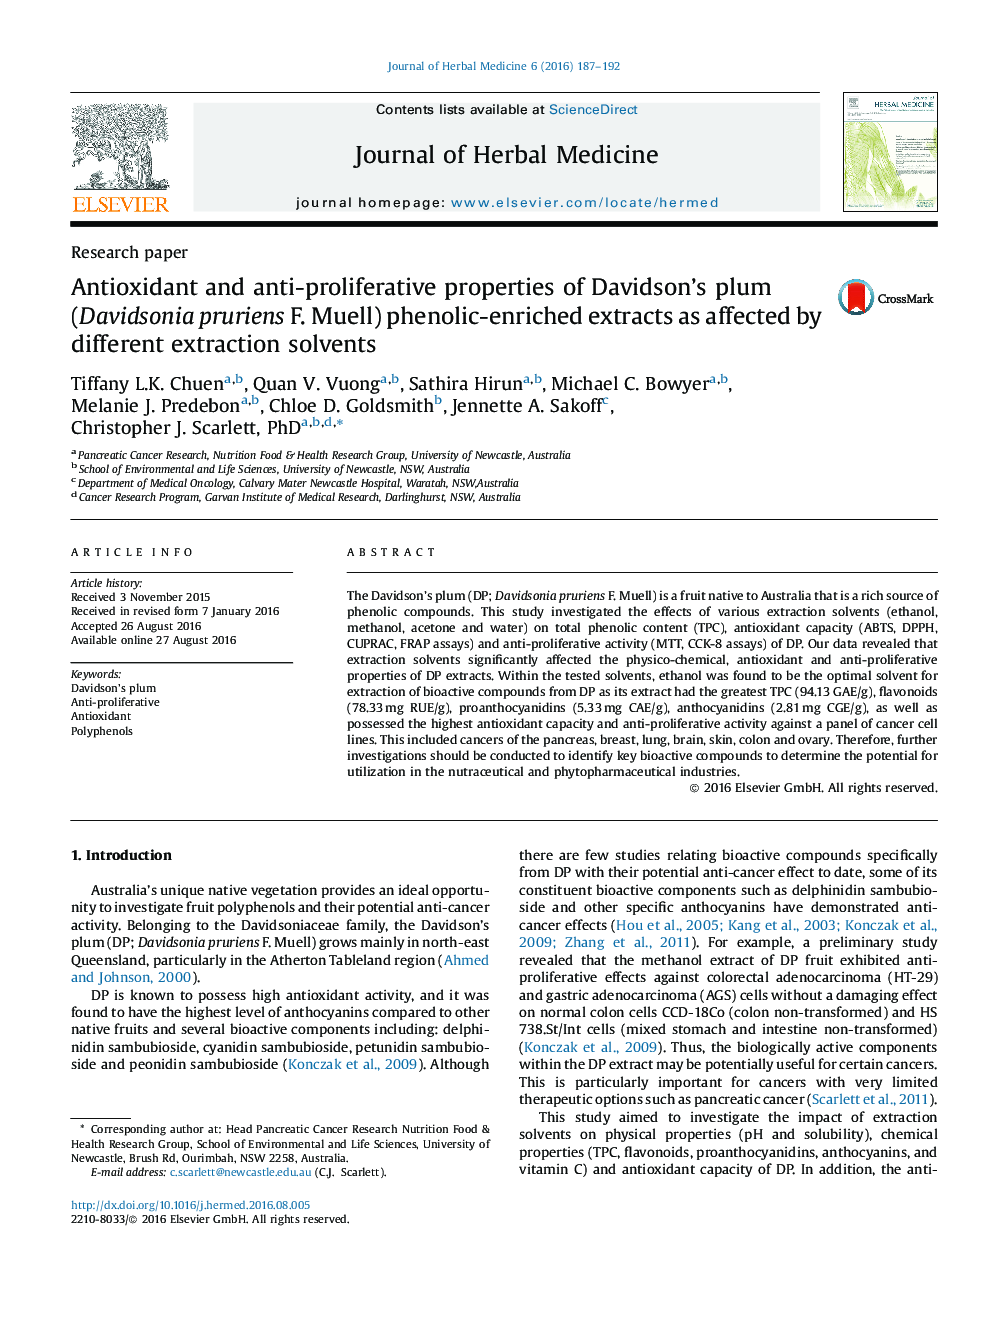 Antioxidant and anti-proliferative properties of Davidson's plum (Davidsonia pruriens F. Muell) phenolic-enriched extracts as affected by different extraction solvents